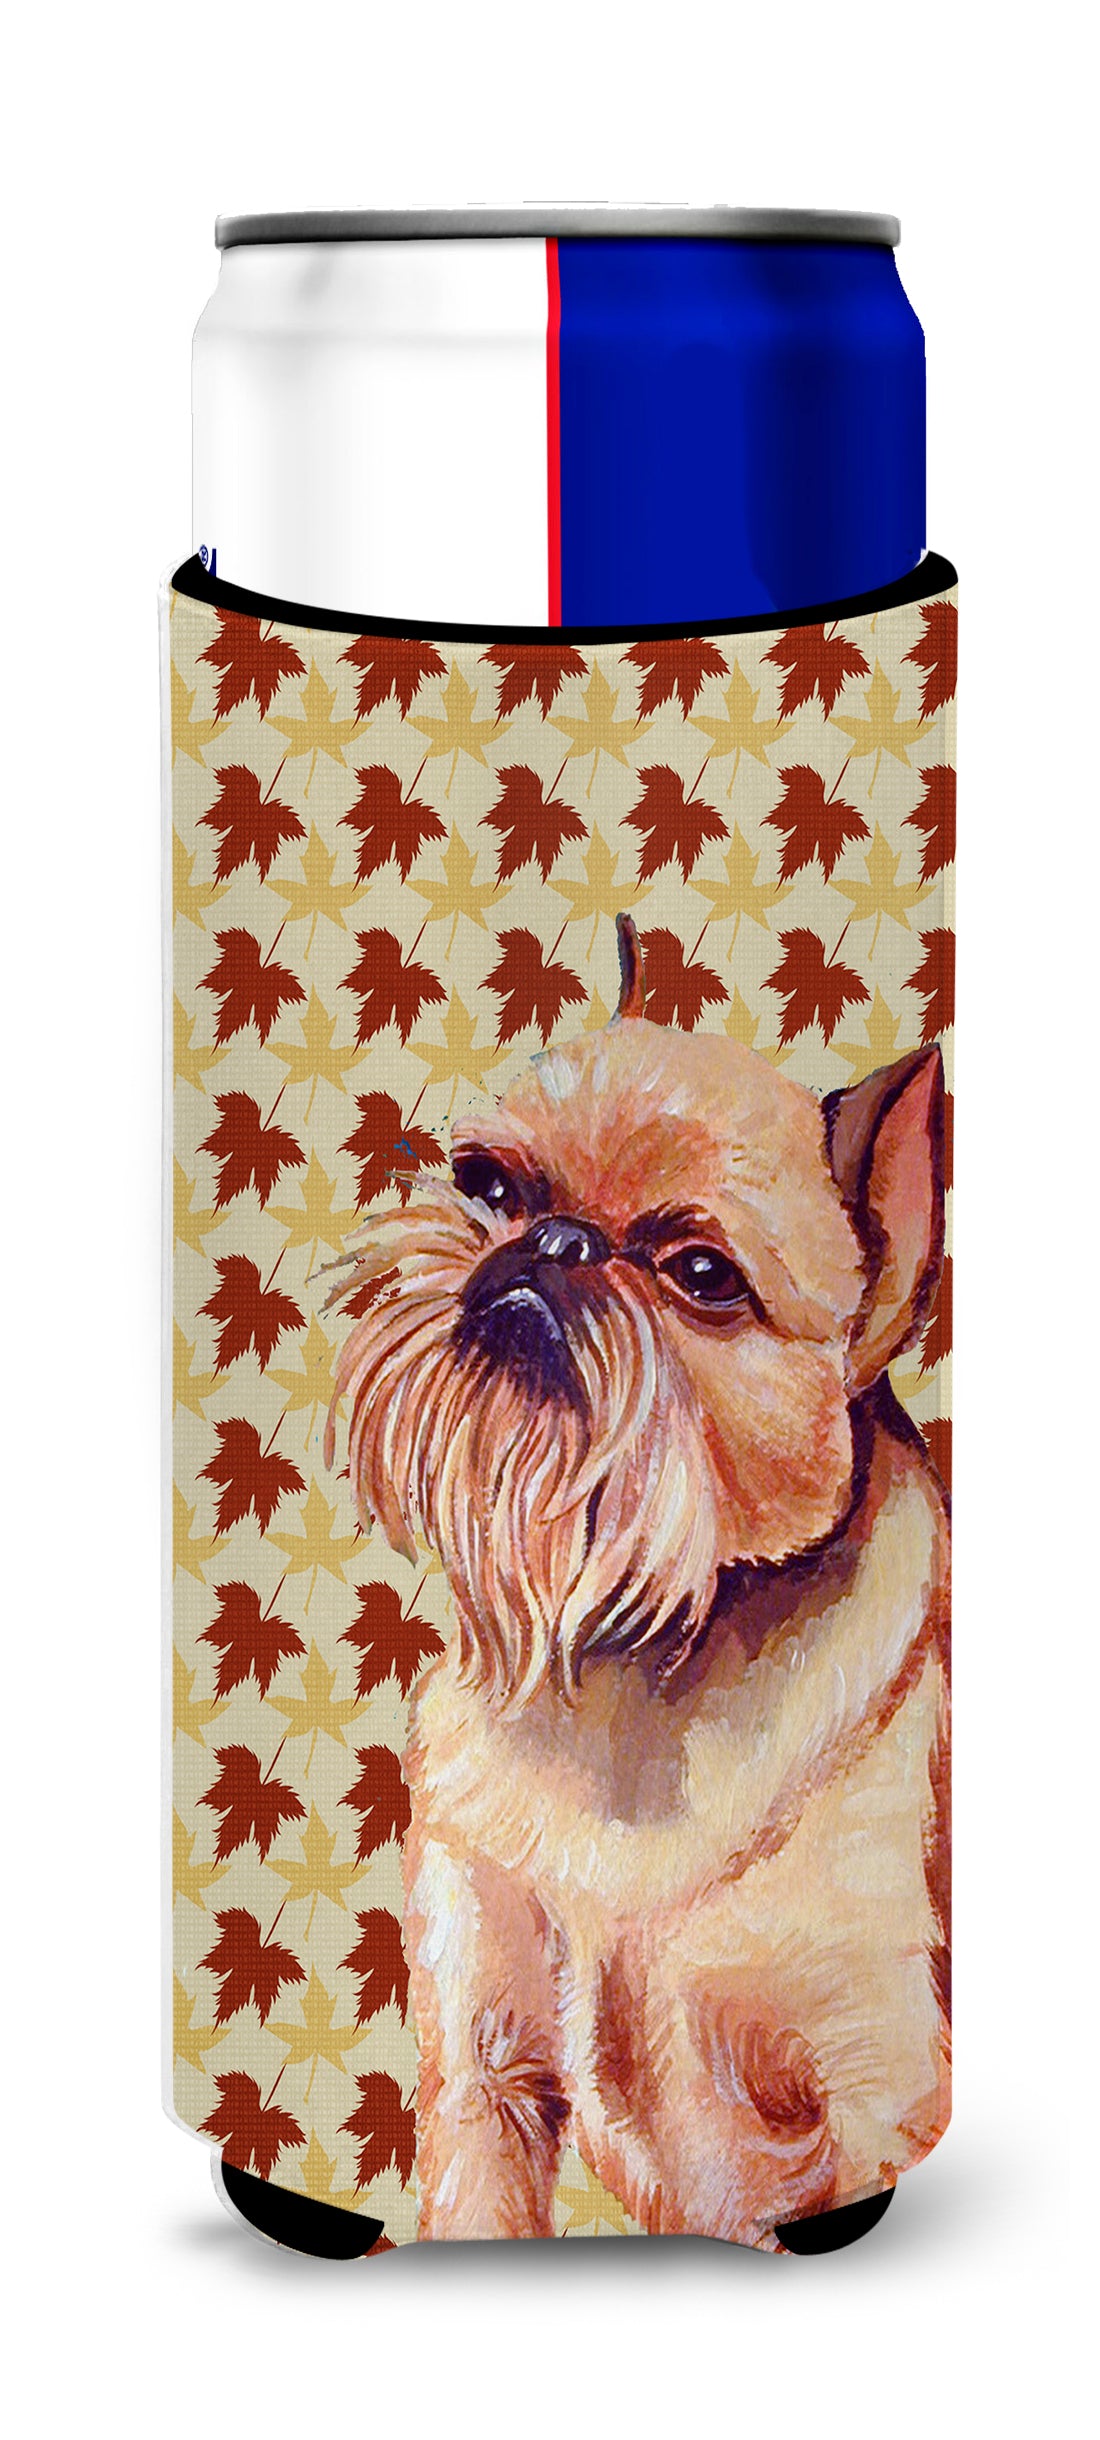 Brussels Griffon Fall Leaves Portrait Ultra Beverage Insulators for slim cans LH9089MUK.